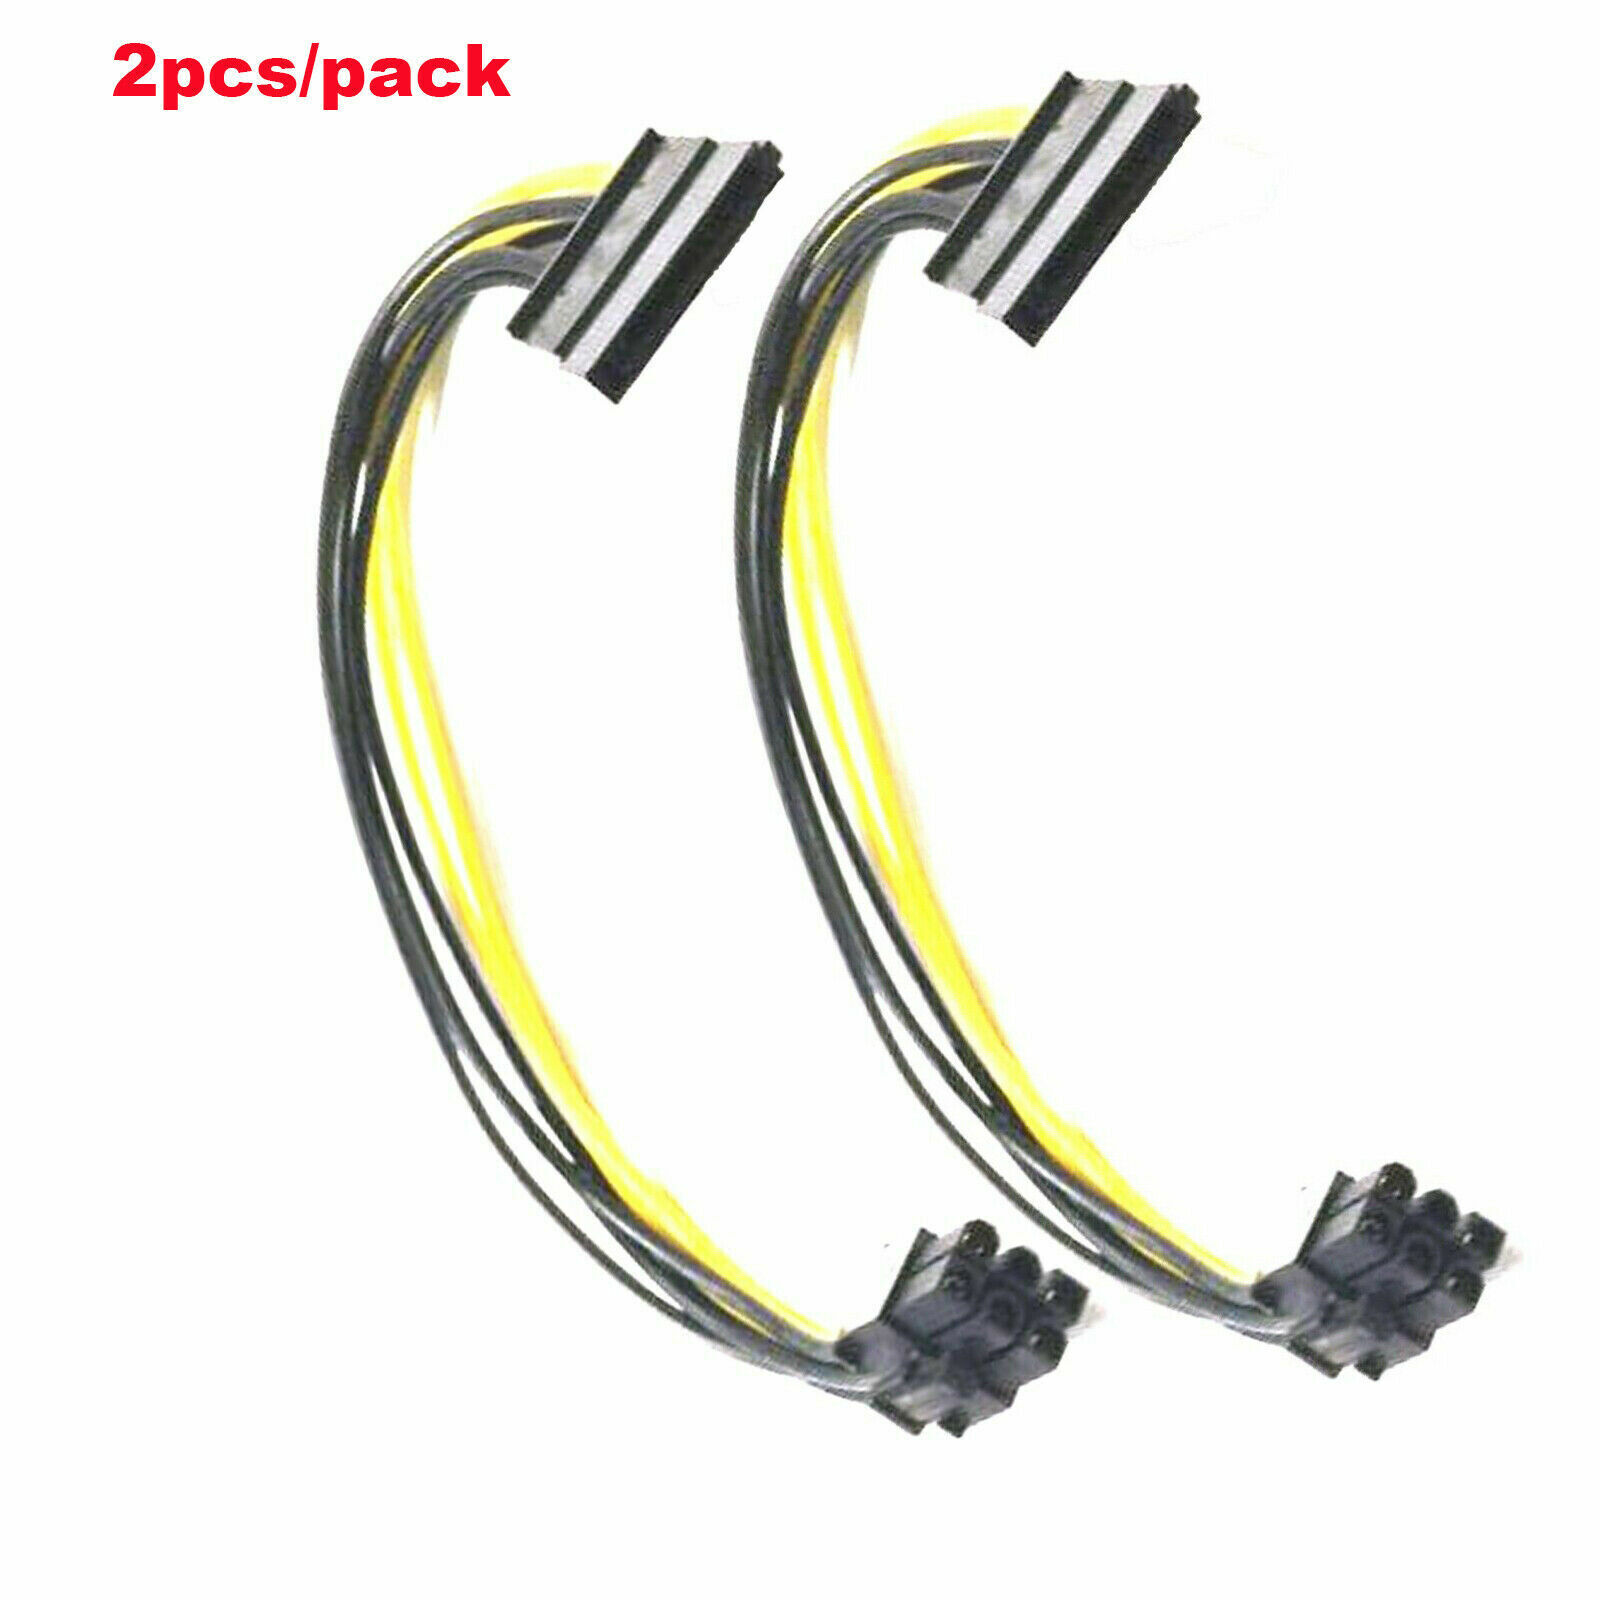 2pcs SATA 15-Pin Female To 6-Pin PCI-Express PCIe Video Card Power Adapter Cable